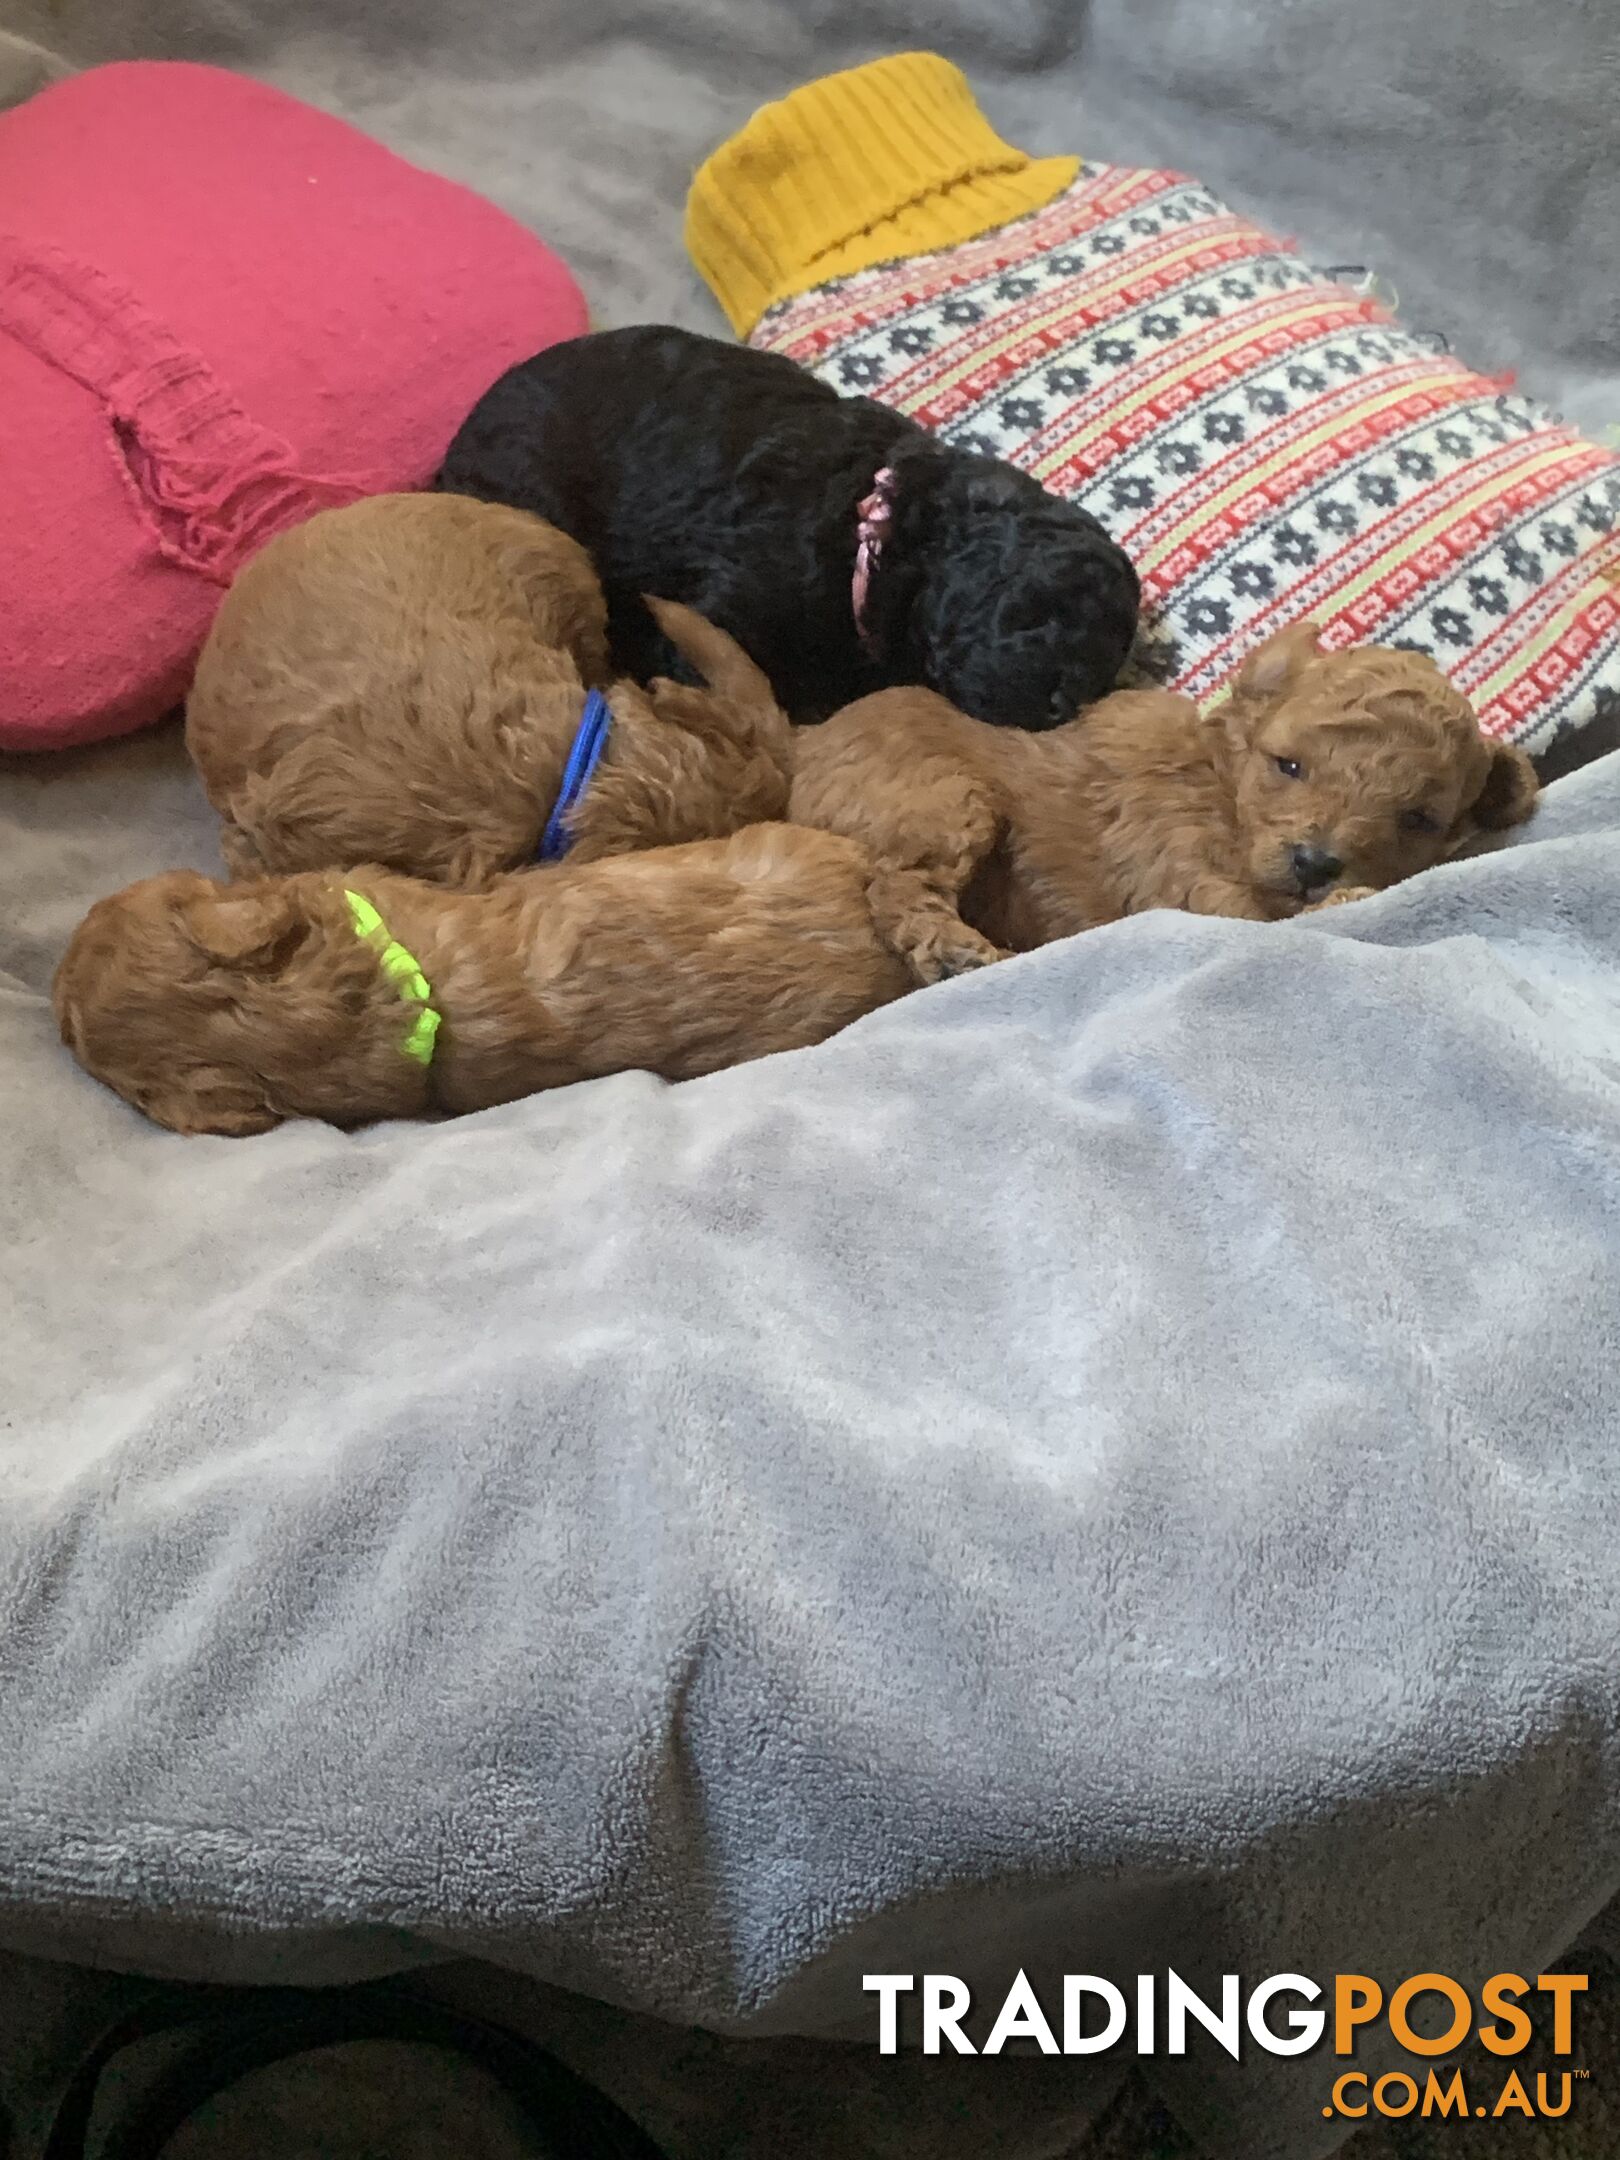 Toy Poodle - Red, male puppies